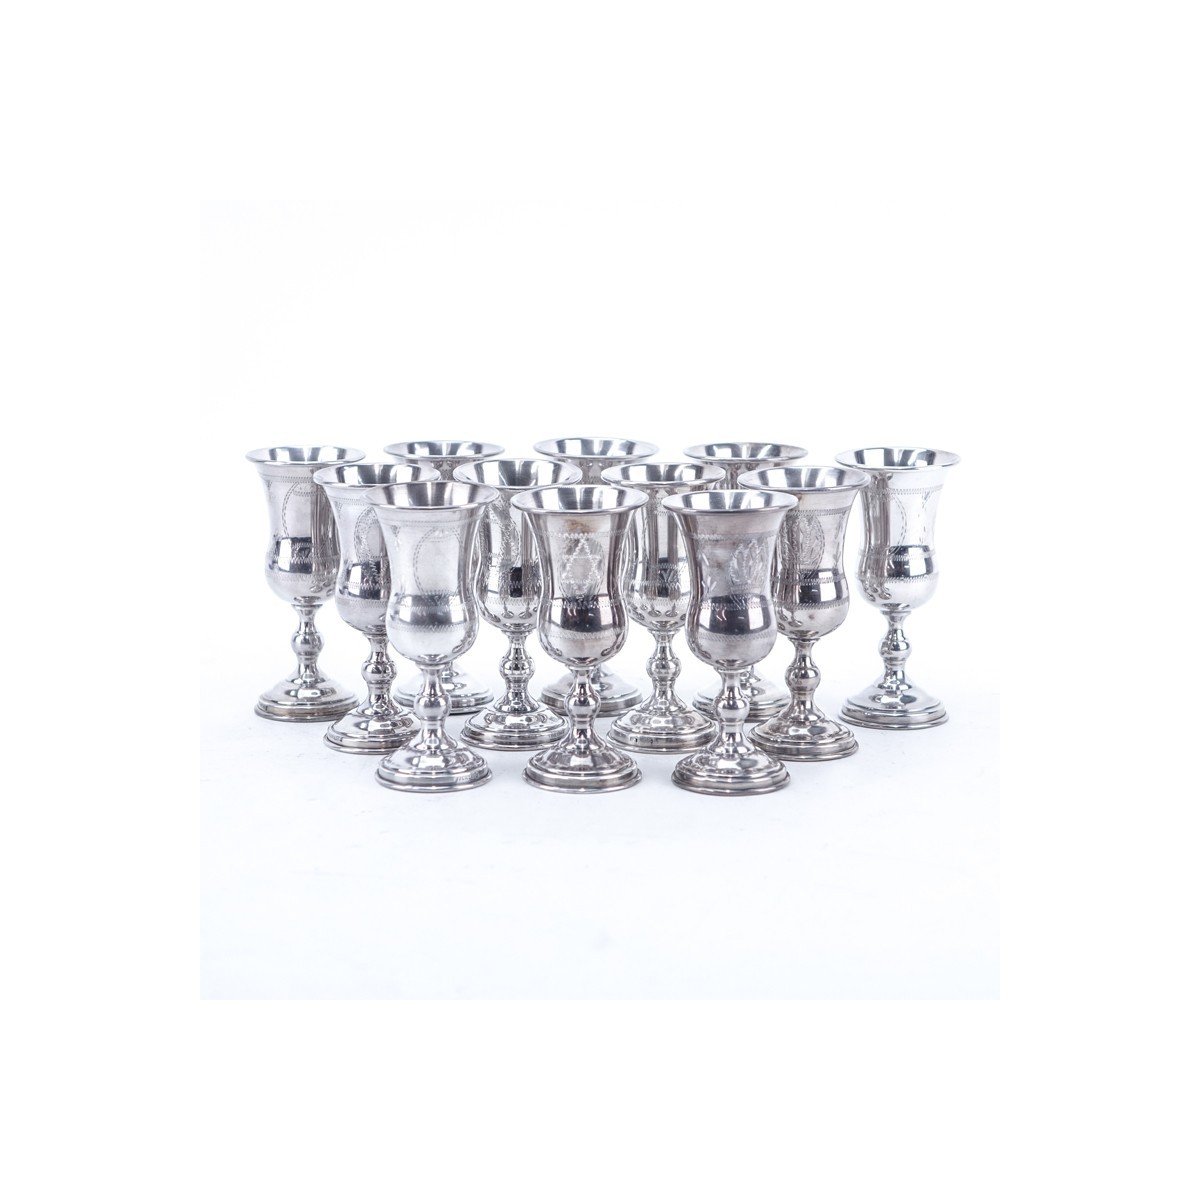 Set of Twelve (12) Sterling Silver Kiddush Cups. All appropriately stamped to base, four are stamped 84 silver.